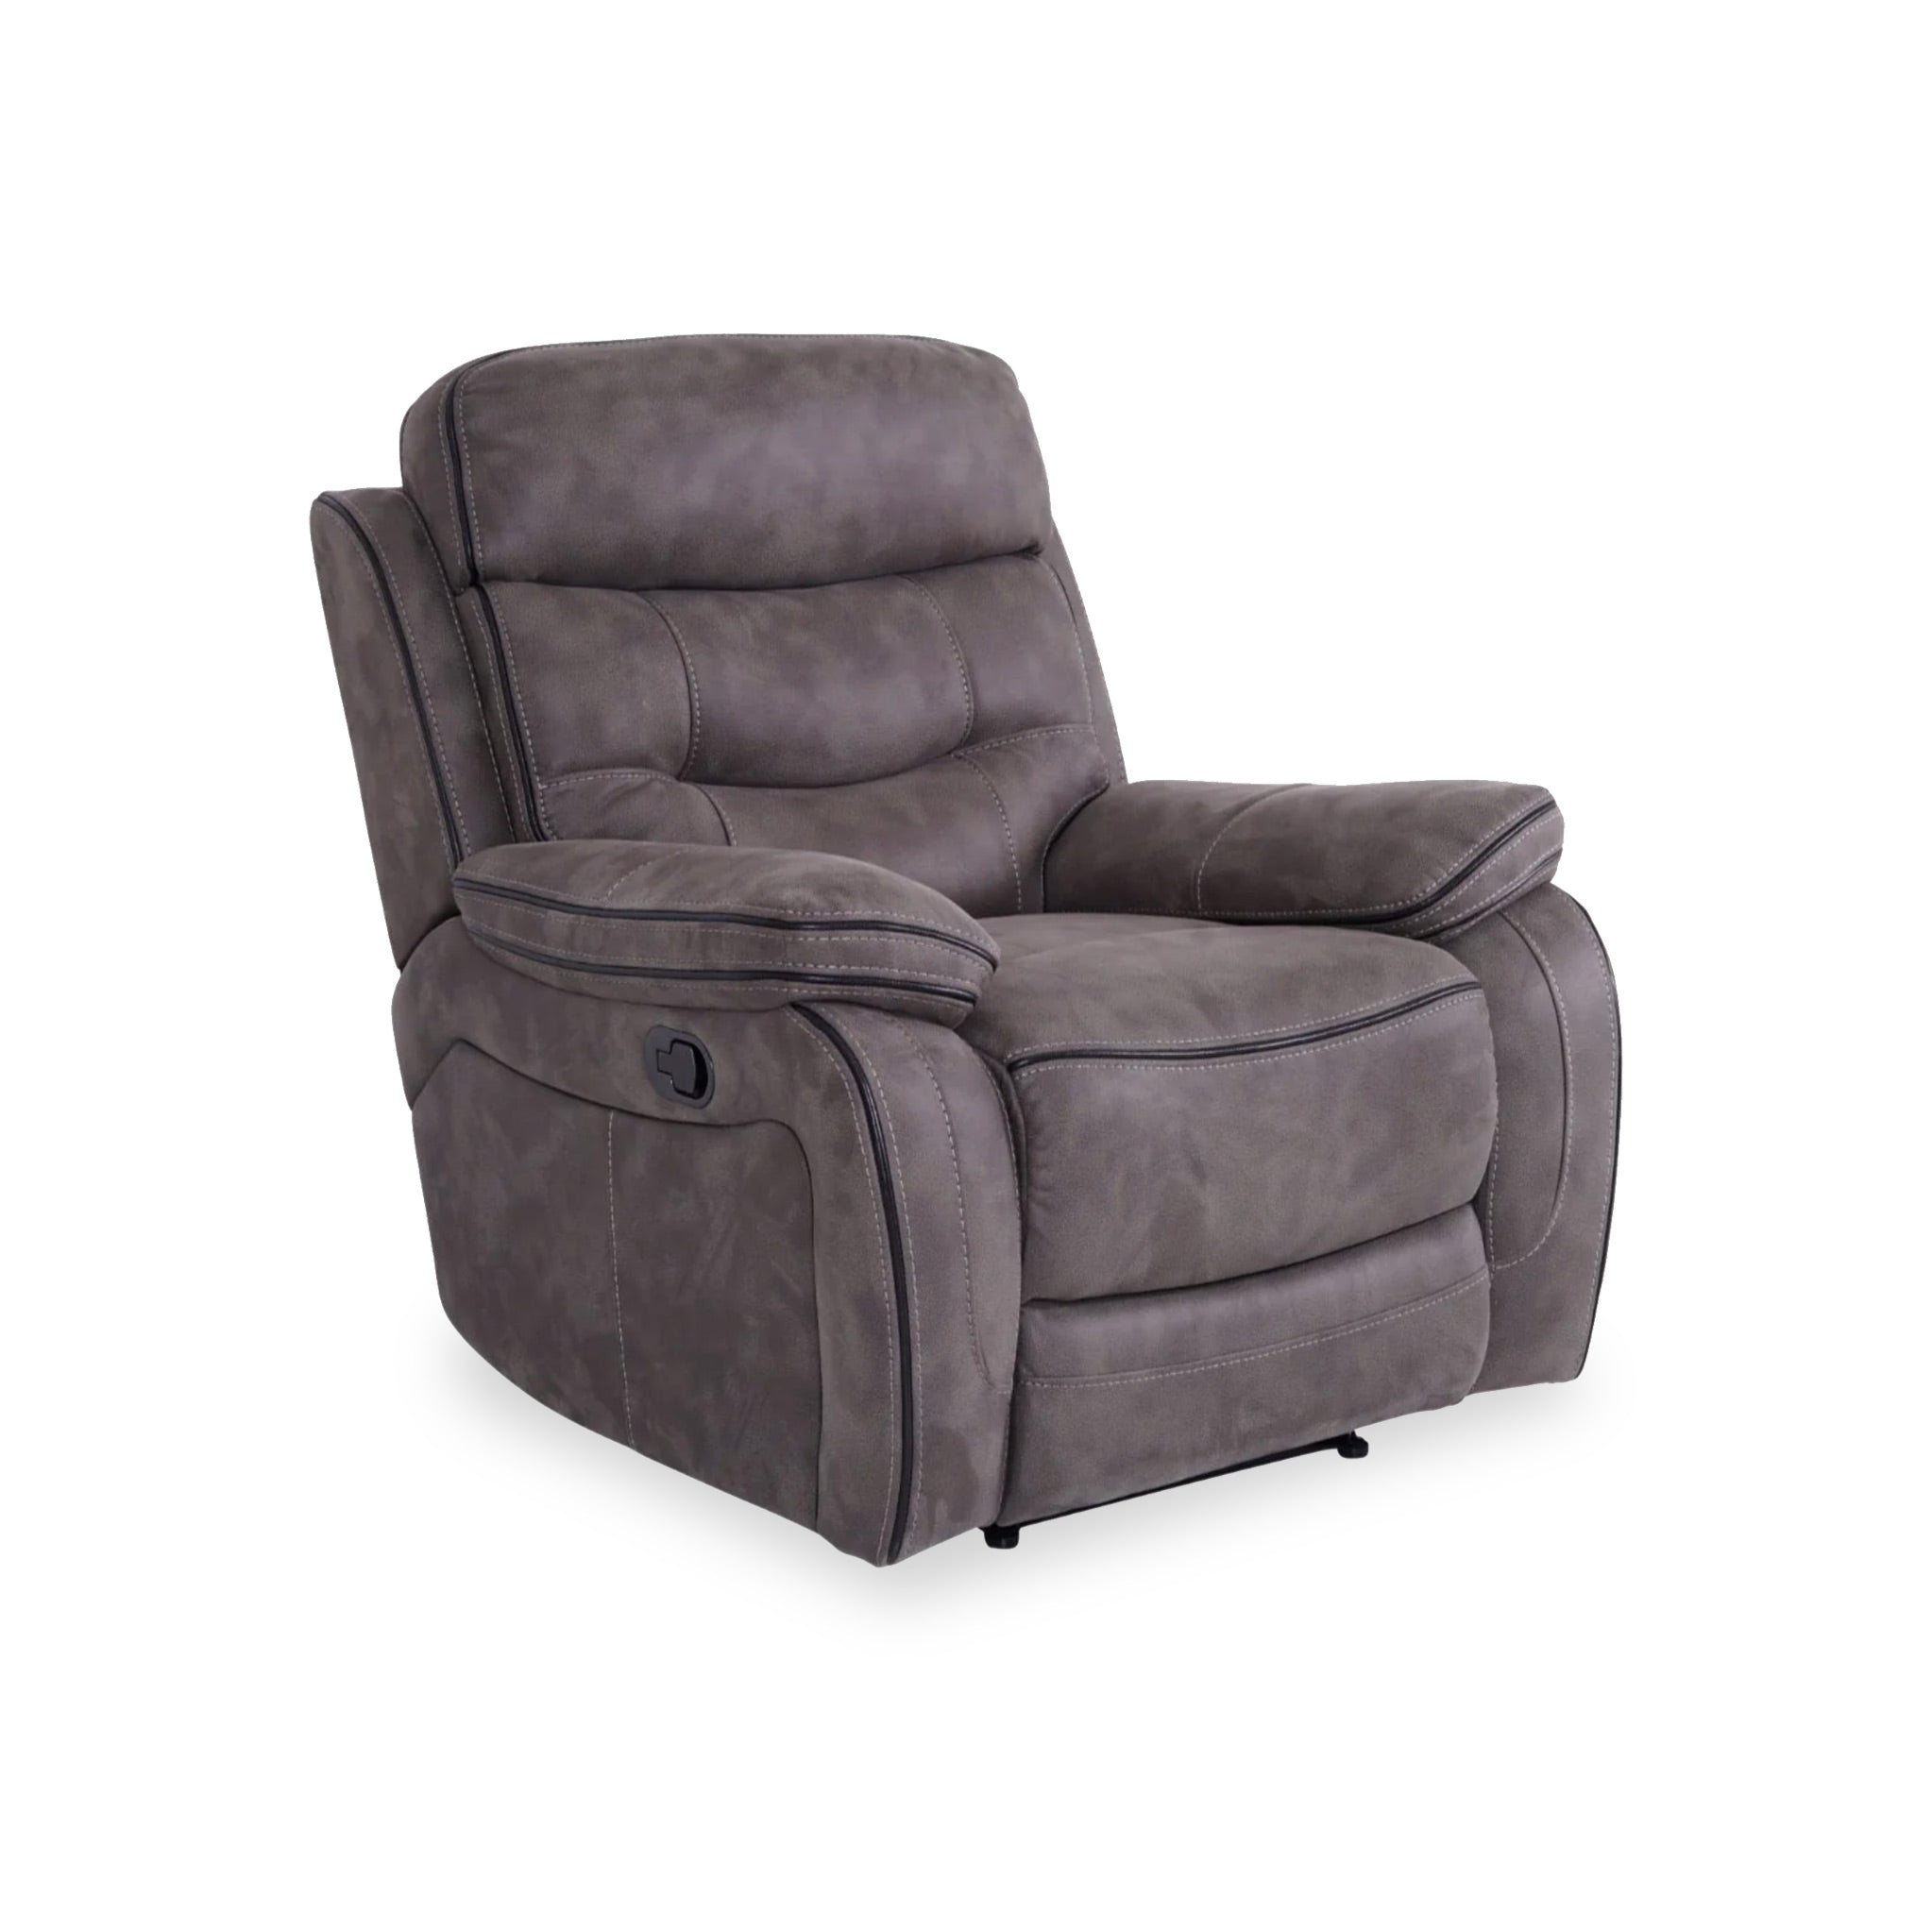 Stanford Fabric Reclining Armchair For Living Room Roseland